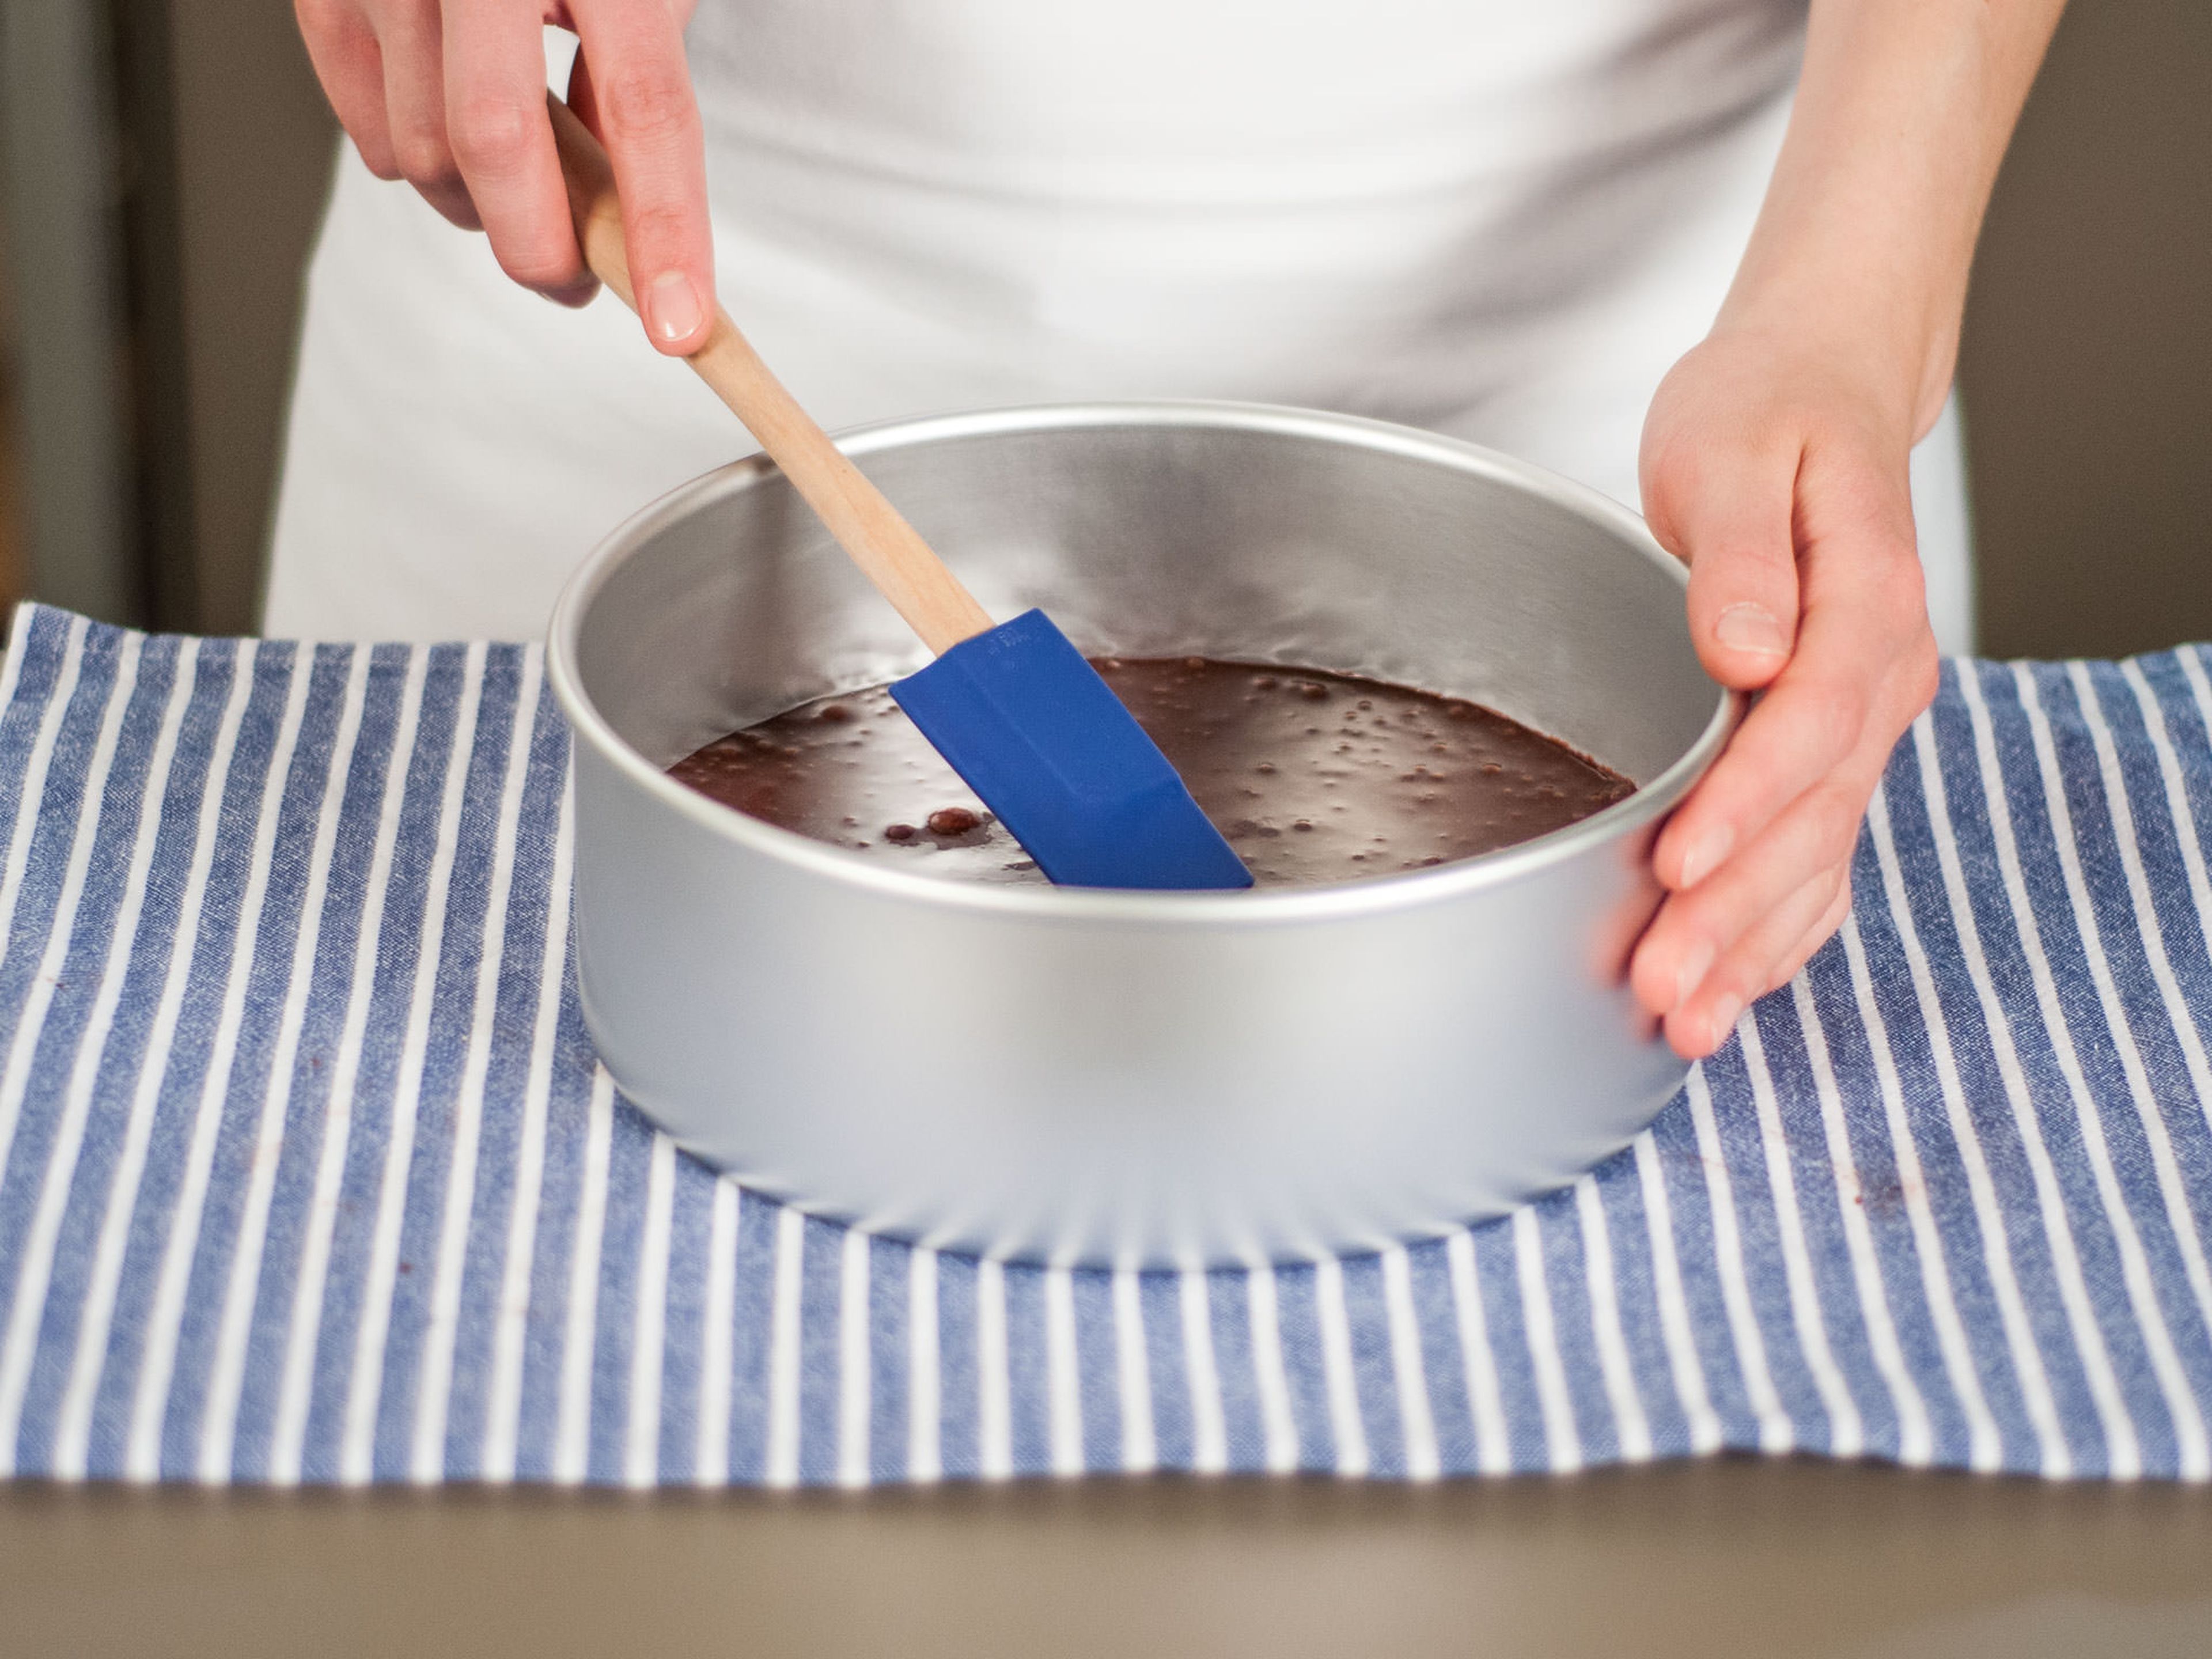 Pour the batter into a round baking form and bake in a preheated oven at 180°C (350°F) for approx. 15 – 20 min. until an inserted toothpick comes out clean.